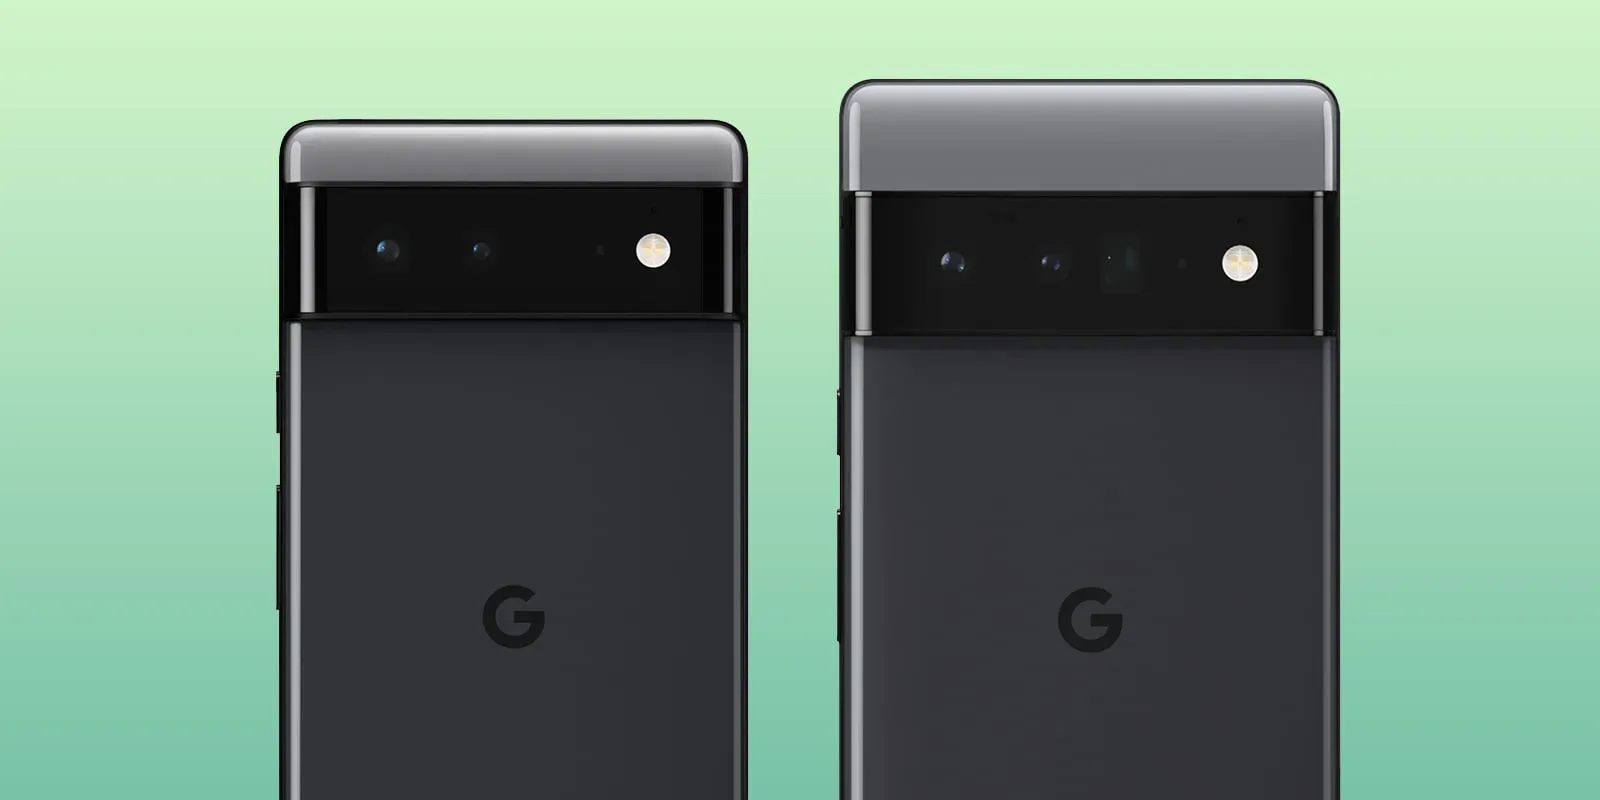 Google Launches Pixel 6 And Pixel 6 Pro